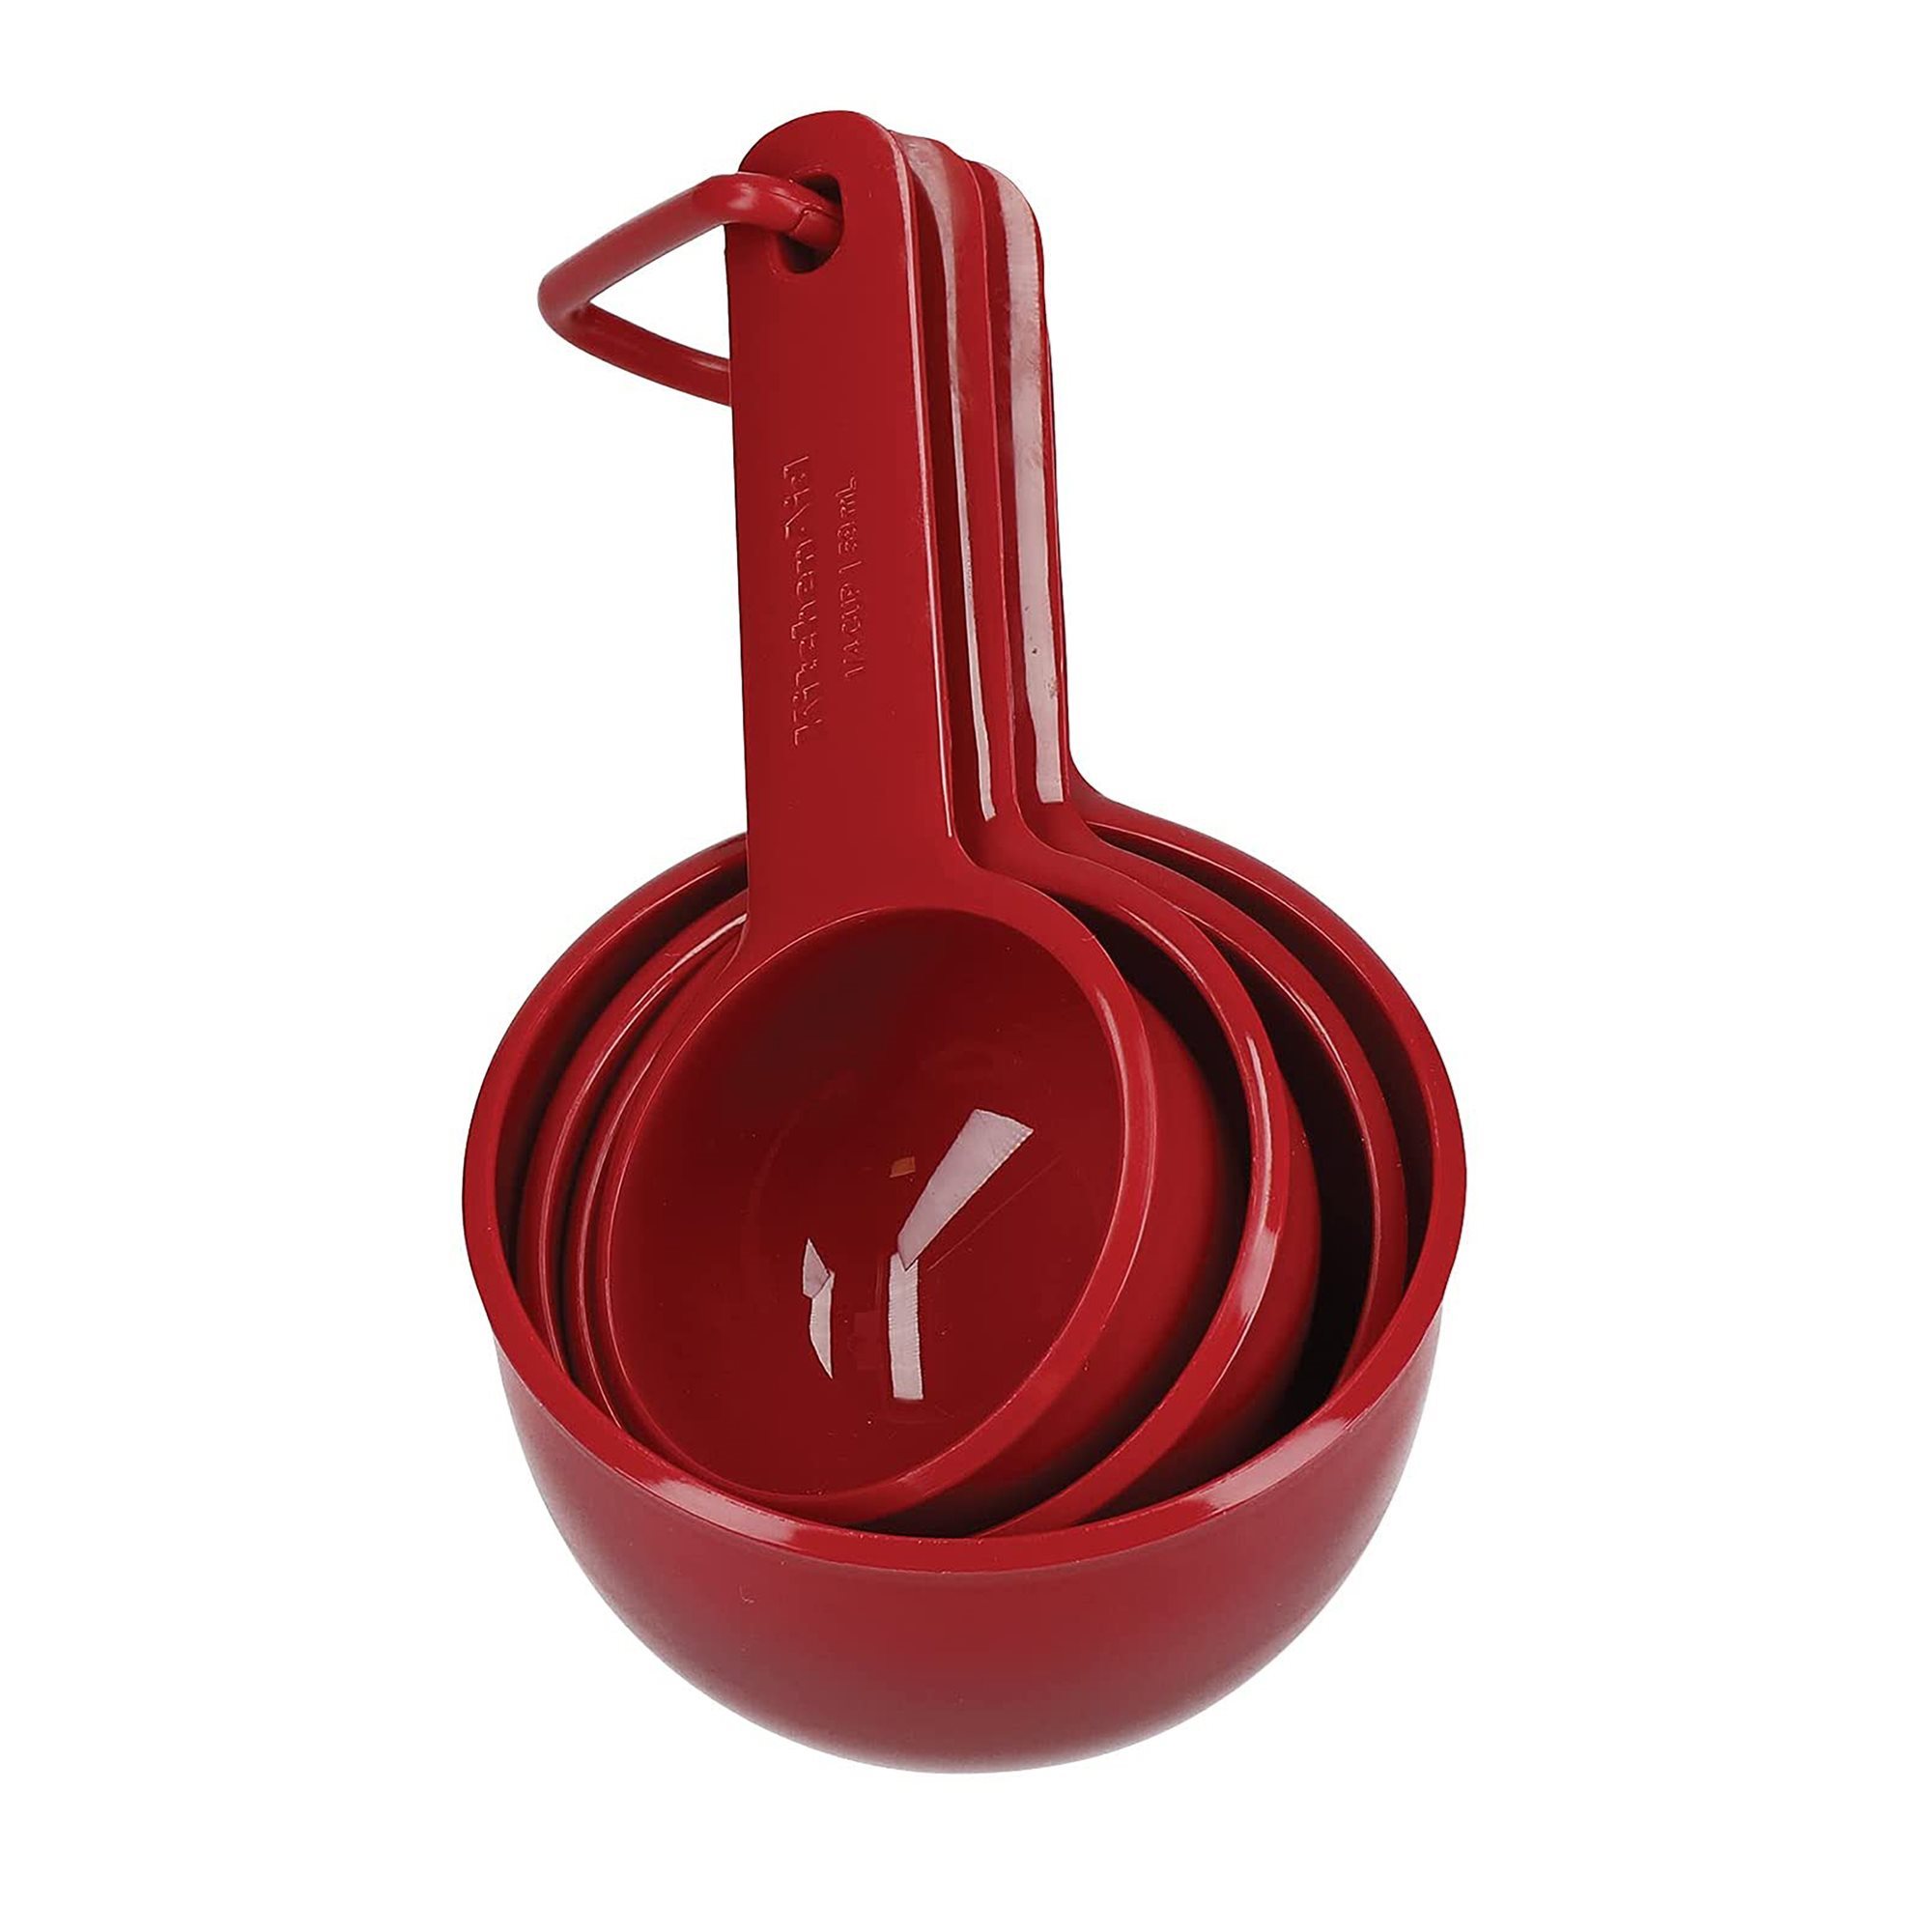 Set of 4 measuring cups, Empire Red color - KitchenAid brand